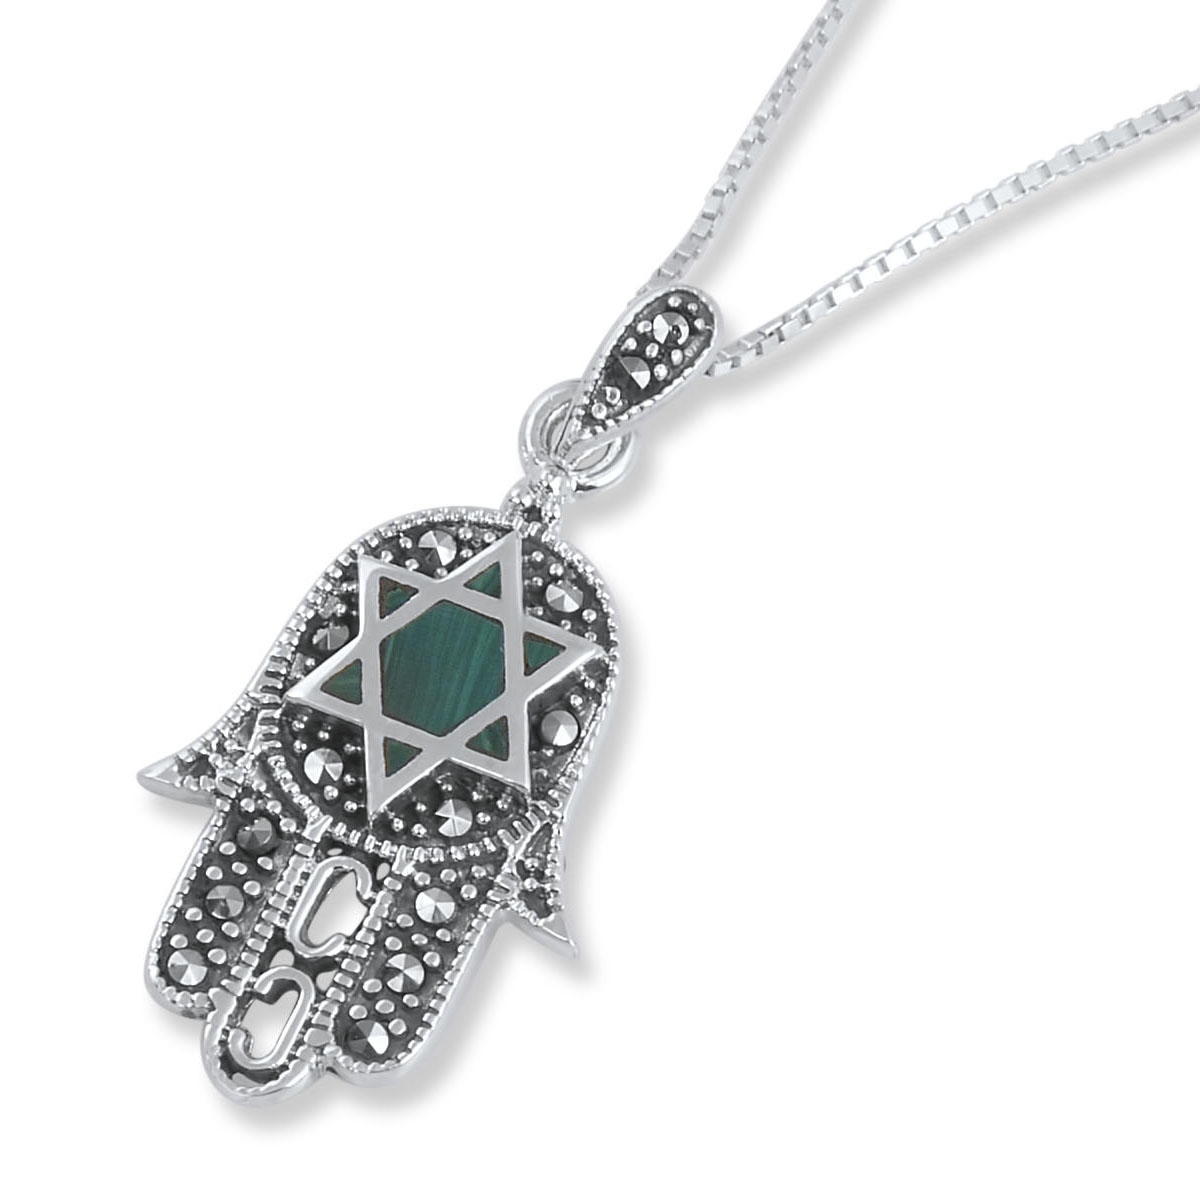 Sterling Silver and Marcasite Hamsa Necklace with Star of David - 1